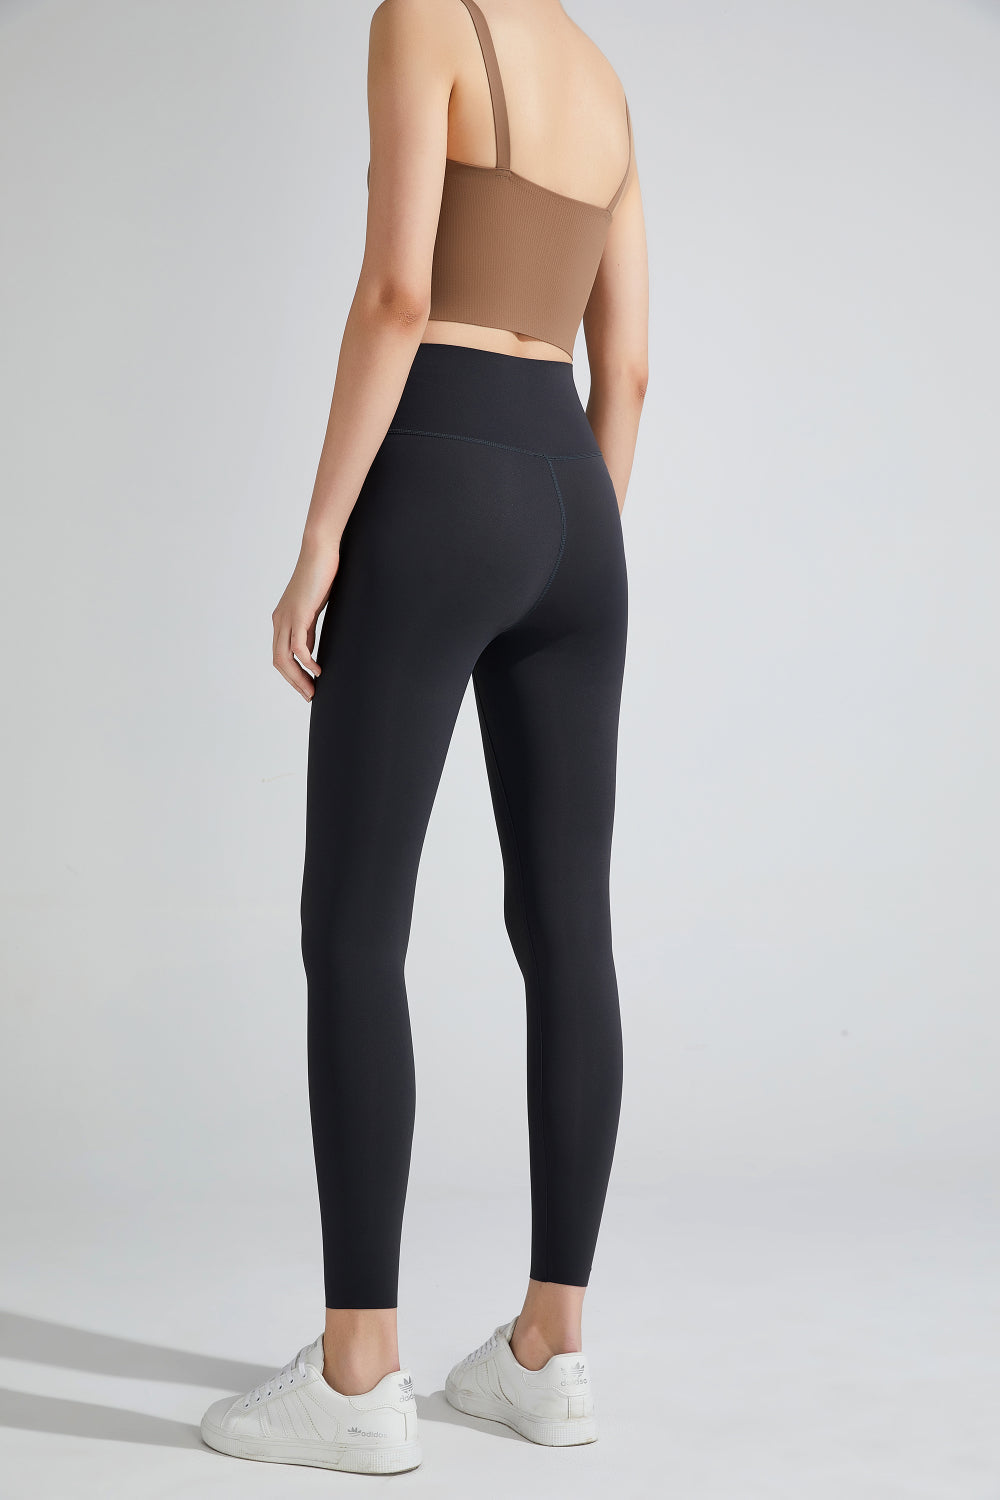 High Waist Breathable Sports Leggings - Women’s Clothing & Accessories - Pants - 3 - 2024